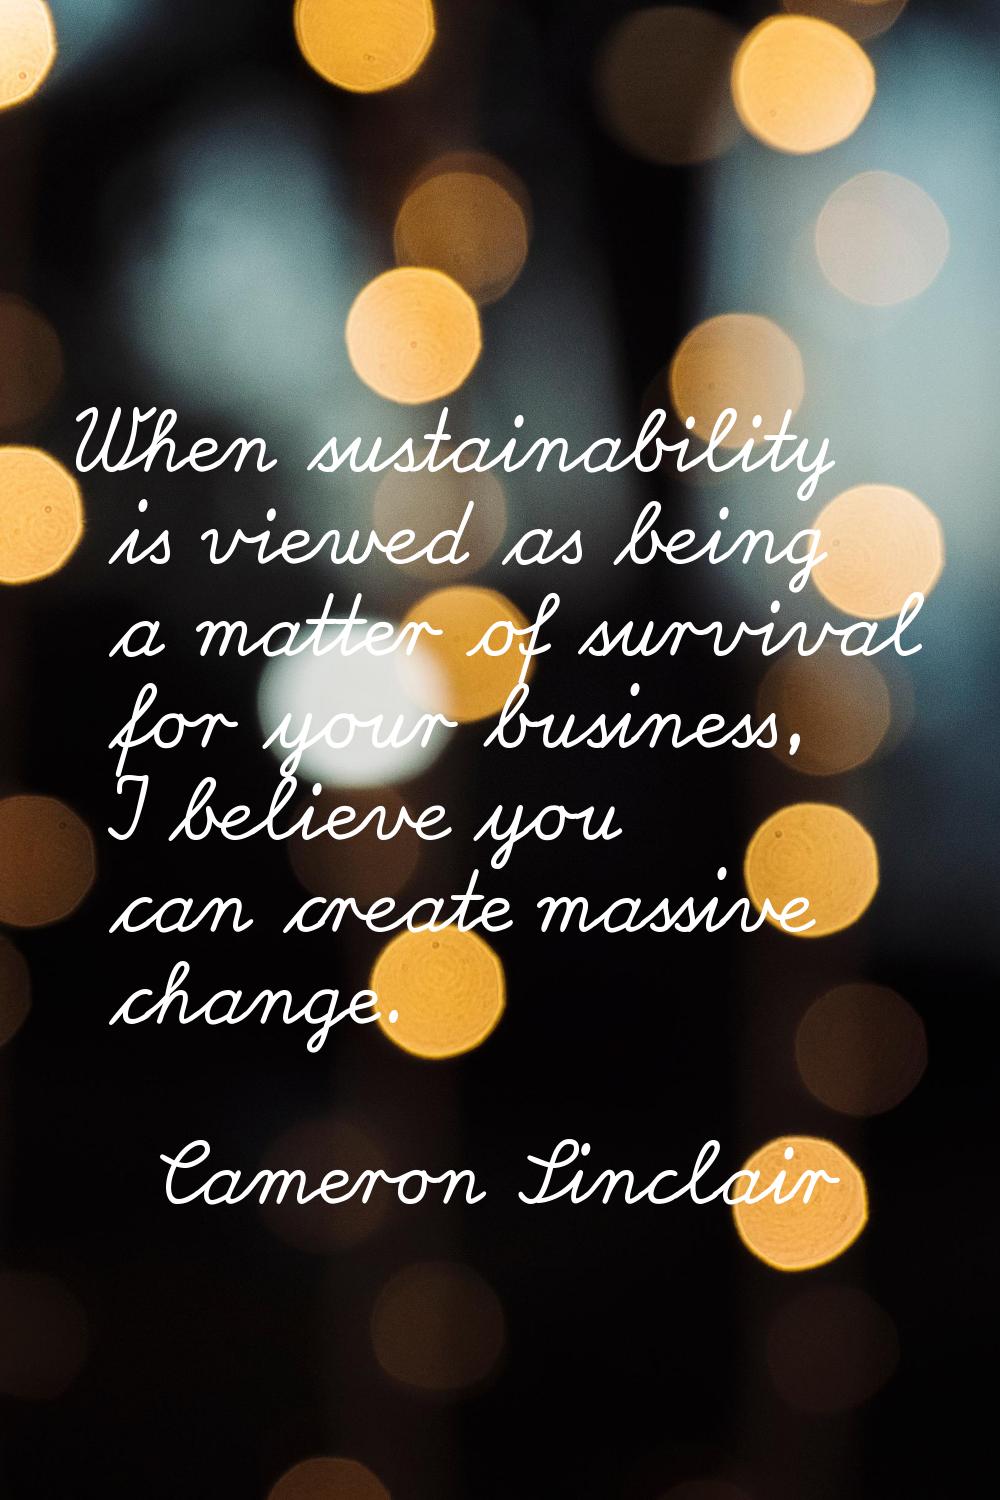 When sustainability is viewed as being a matter of survival for your business, I believe you can cr